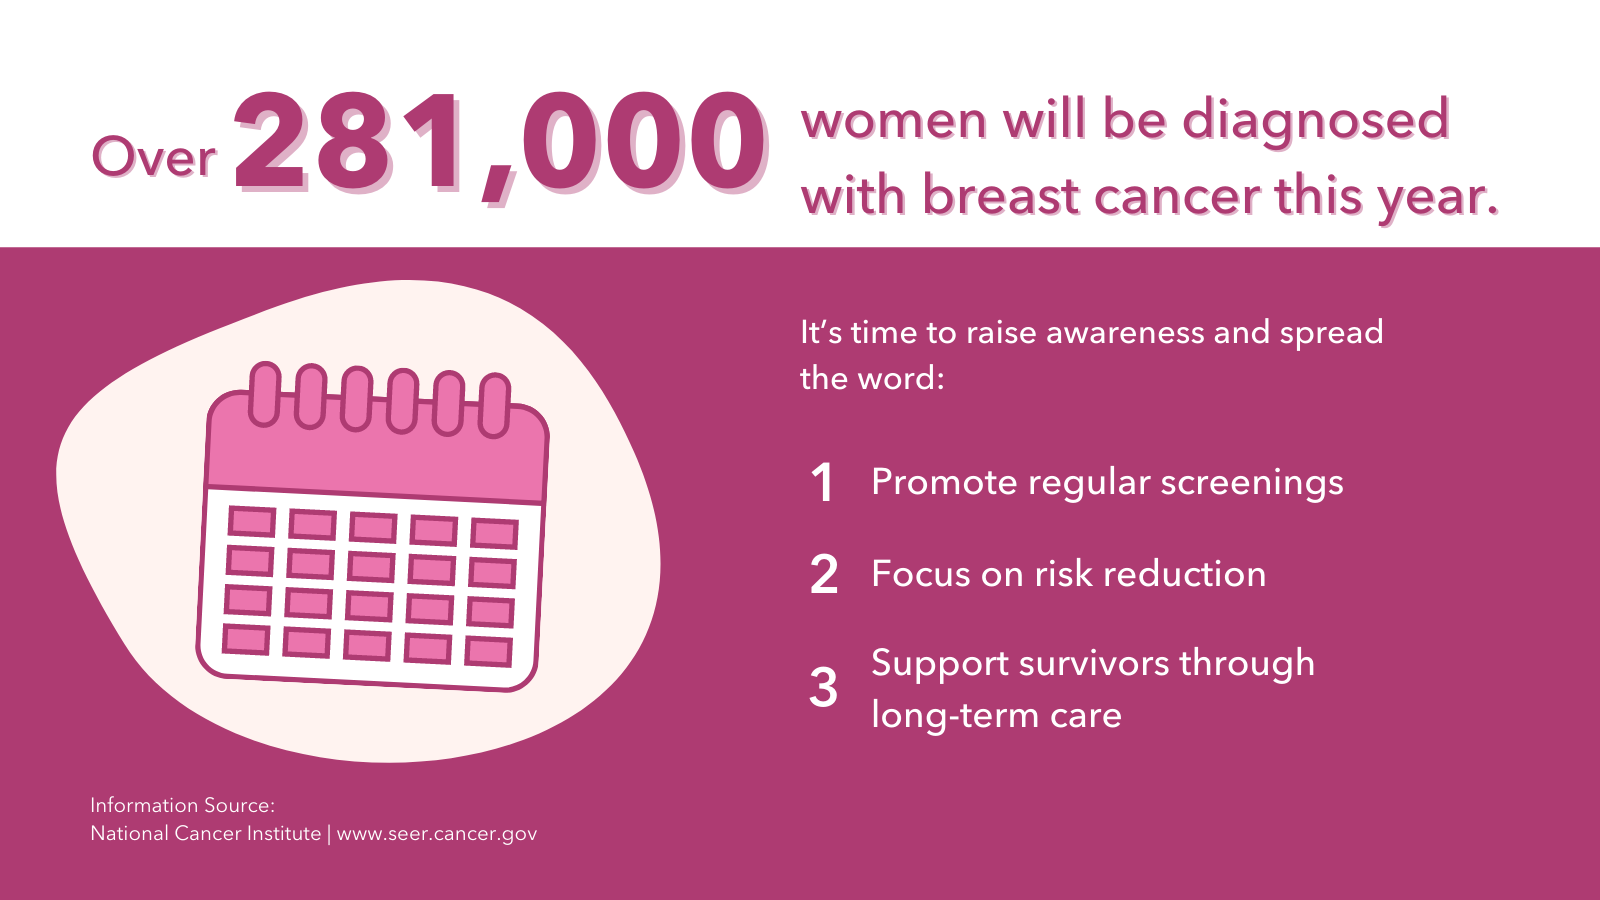 Over 281,000 women will be diagnosed with breast cancer this year.